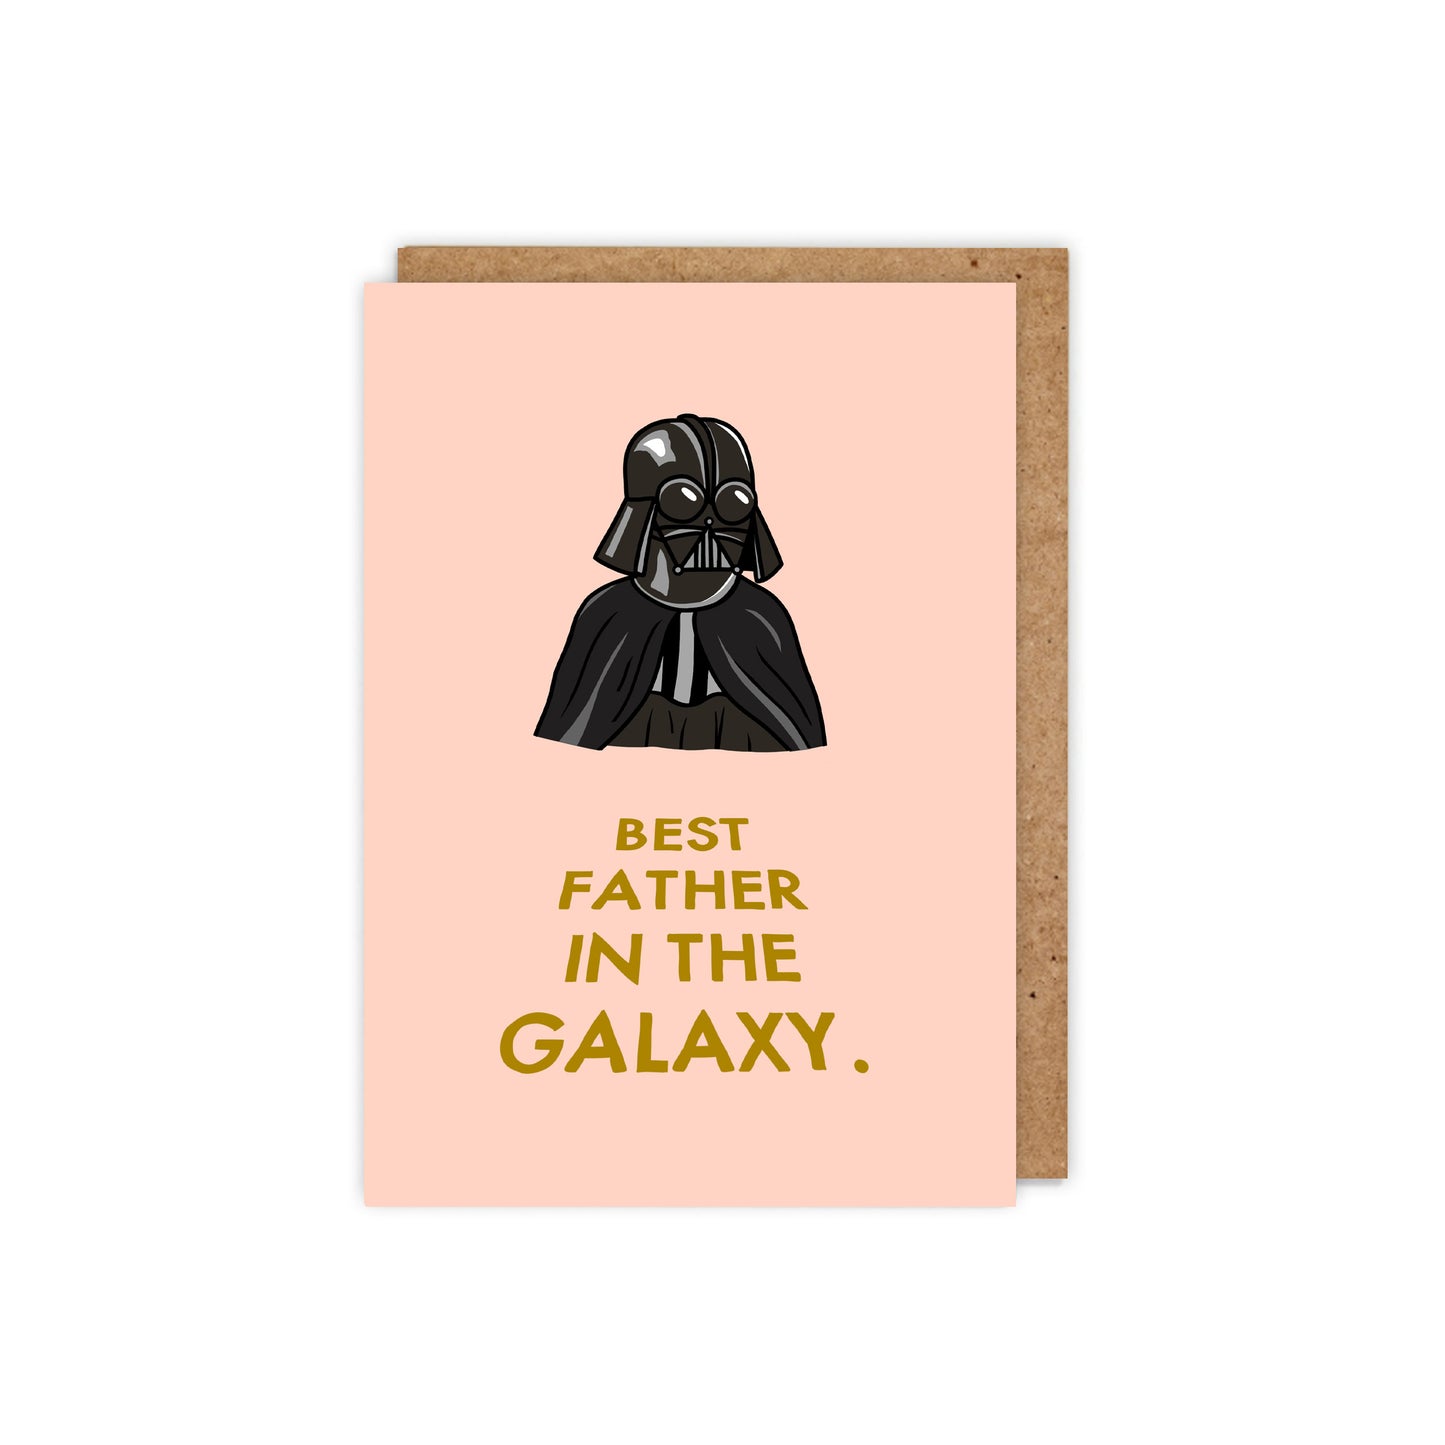 Best Father In the Galaxy. Star Wars inspired Father's Day Card